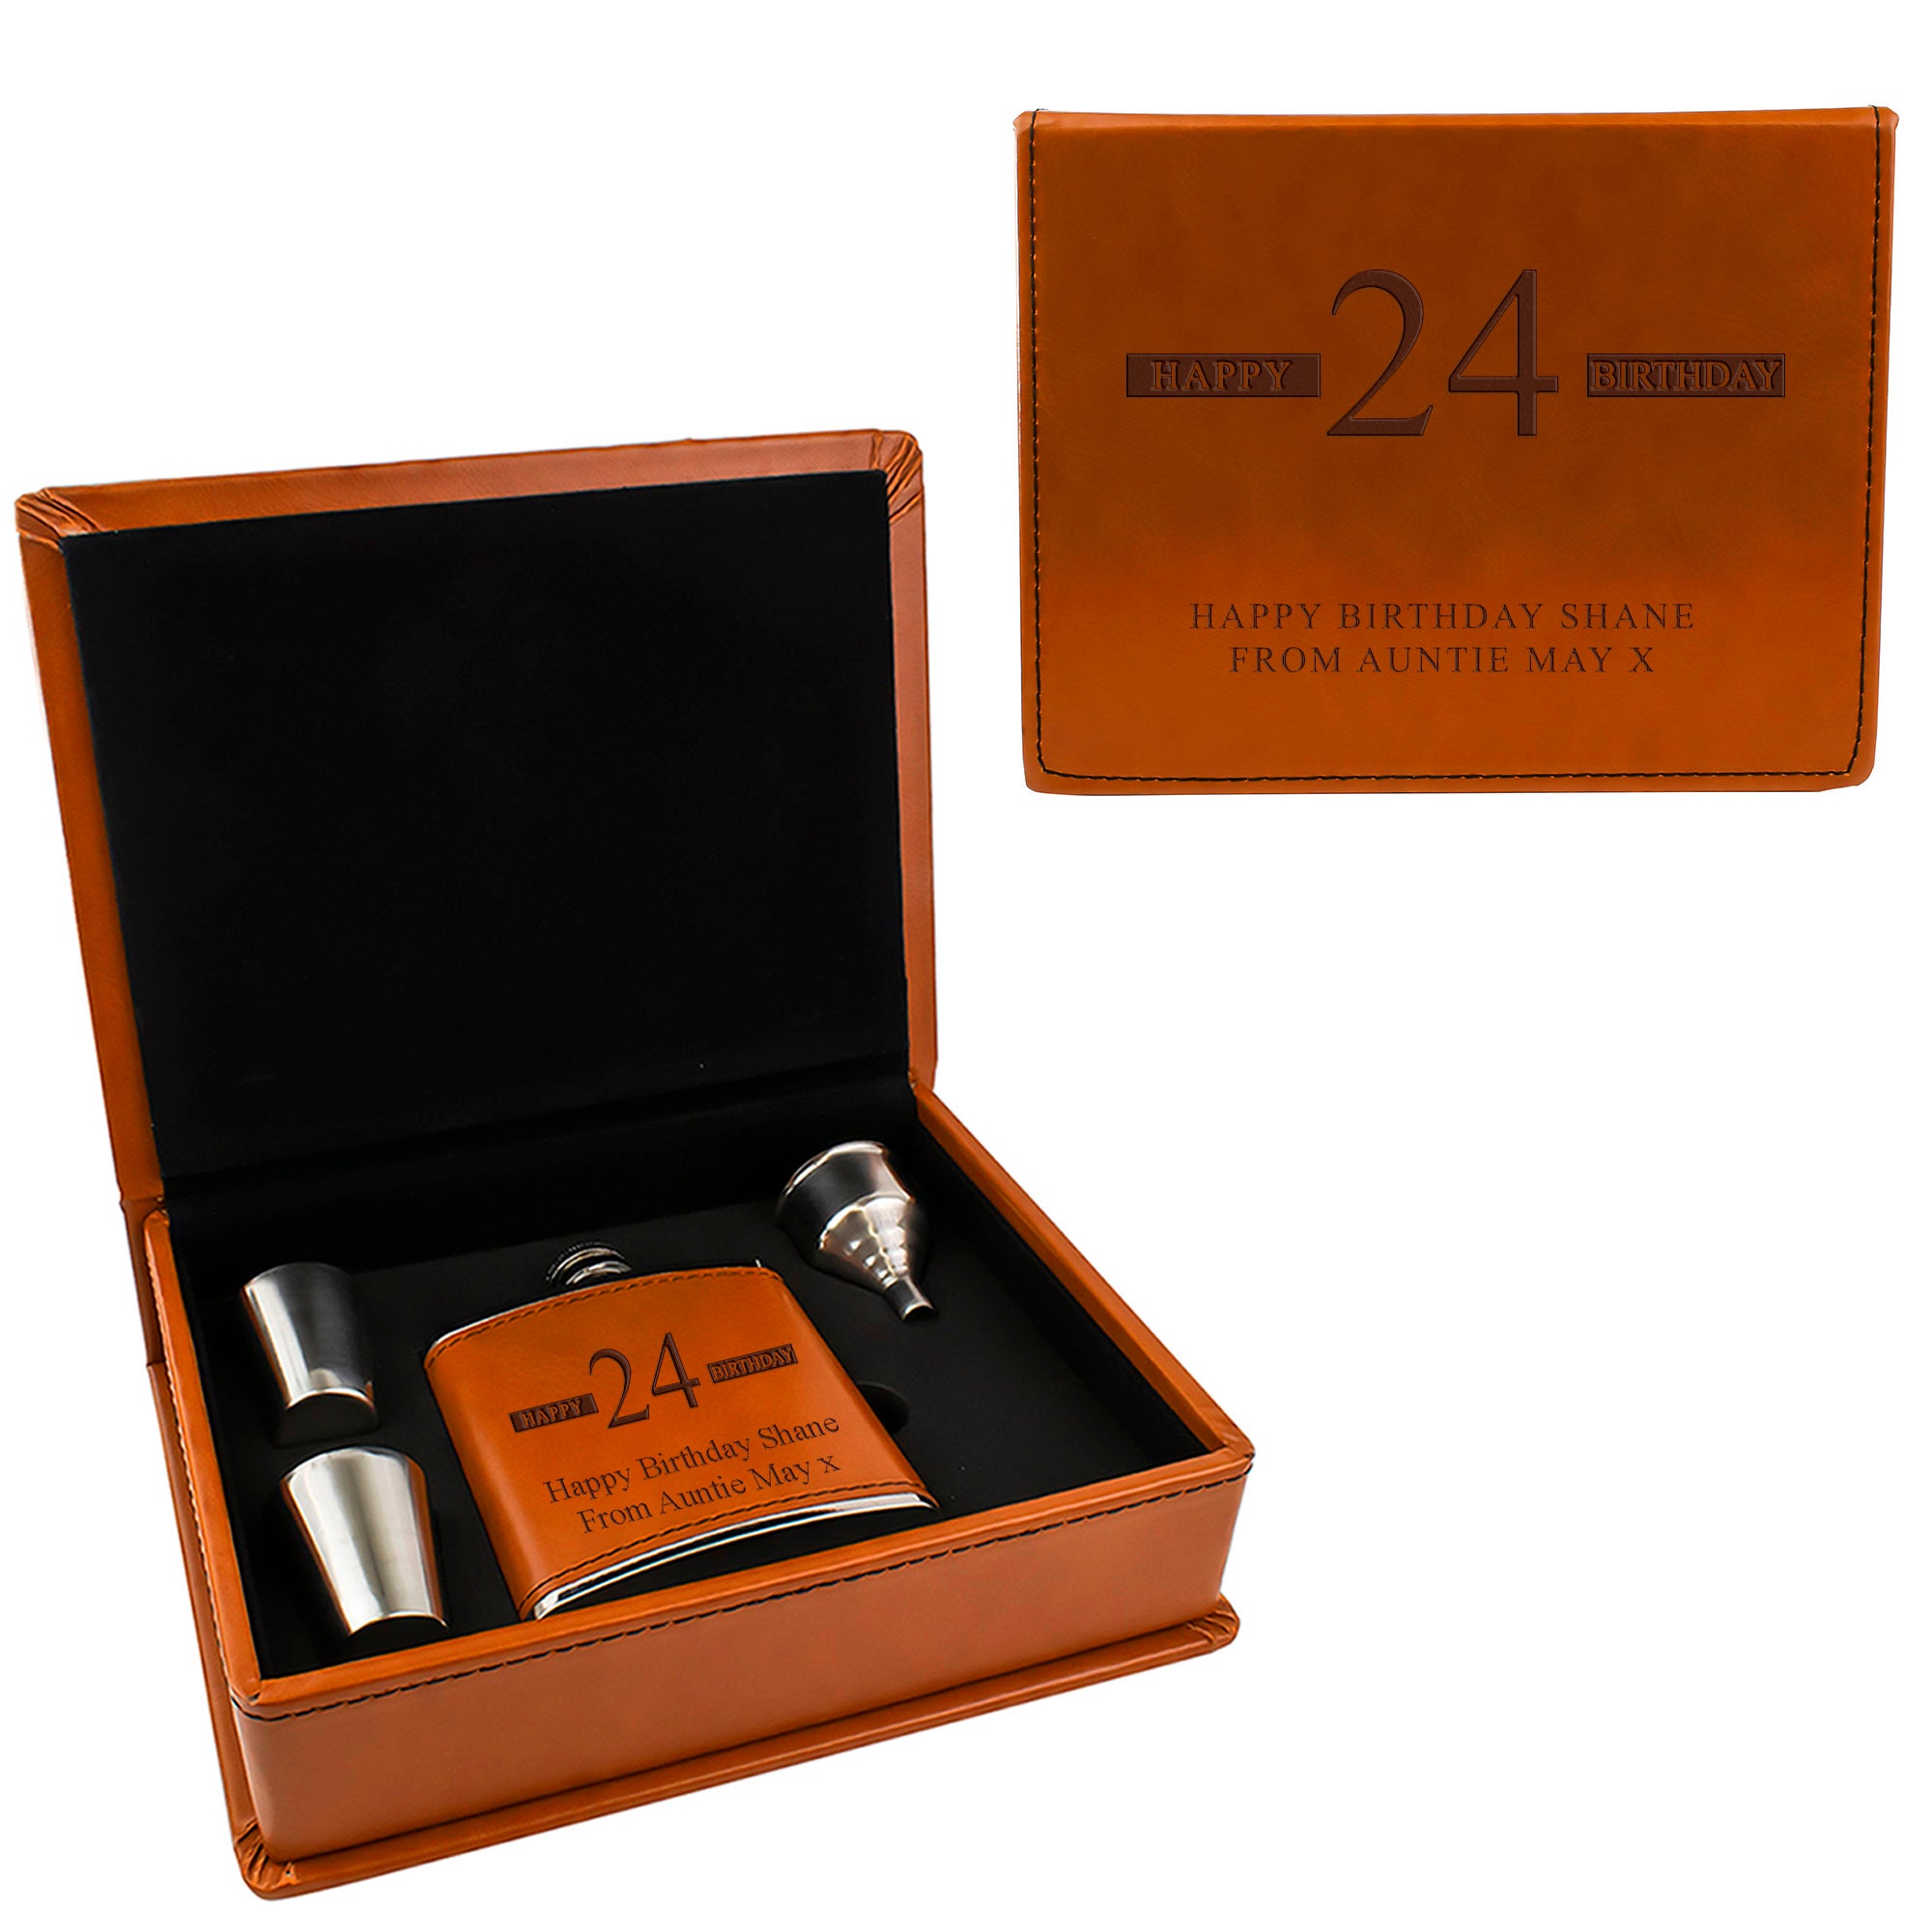 Tan Brown Leather Hip Flask Gift Set - Happy Birthday Style 3